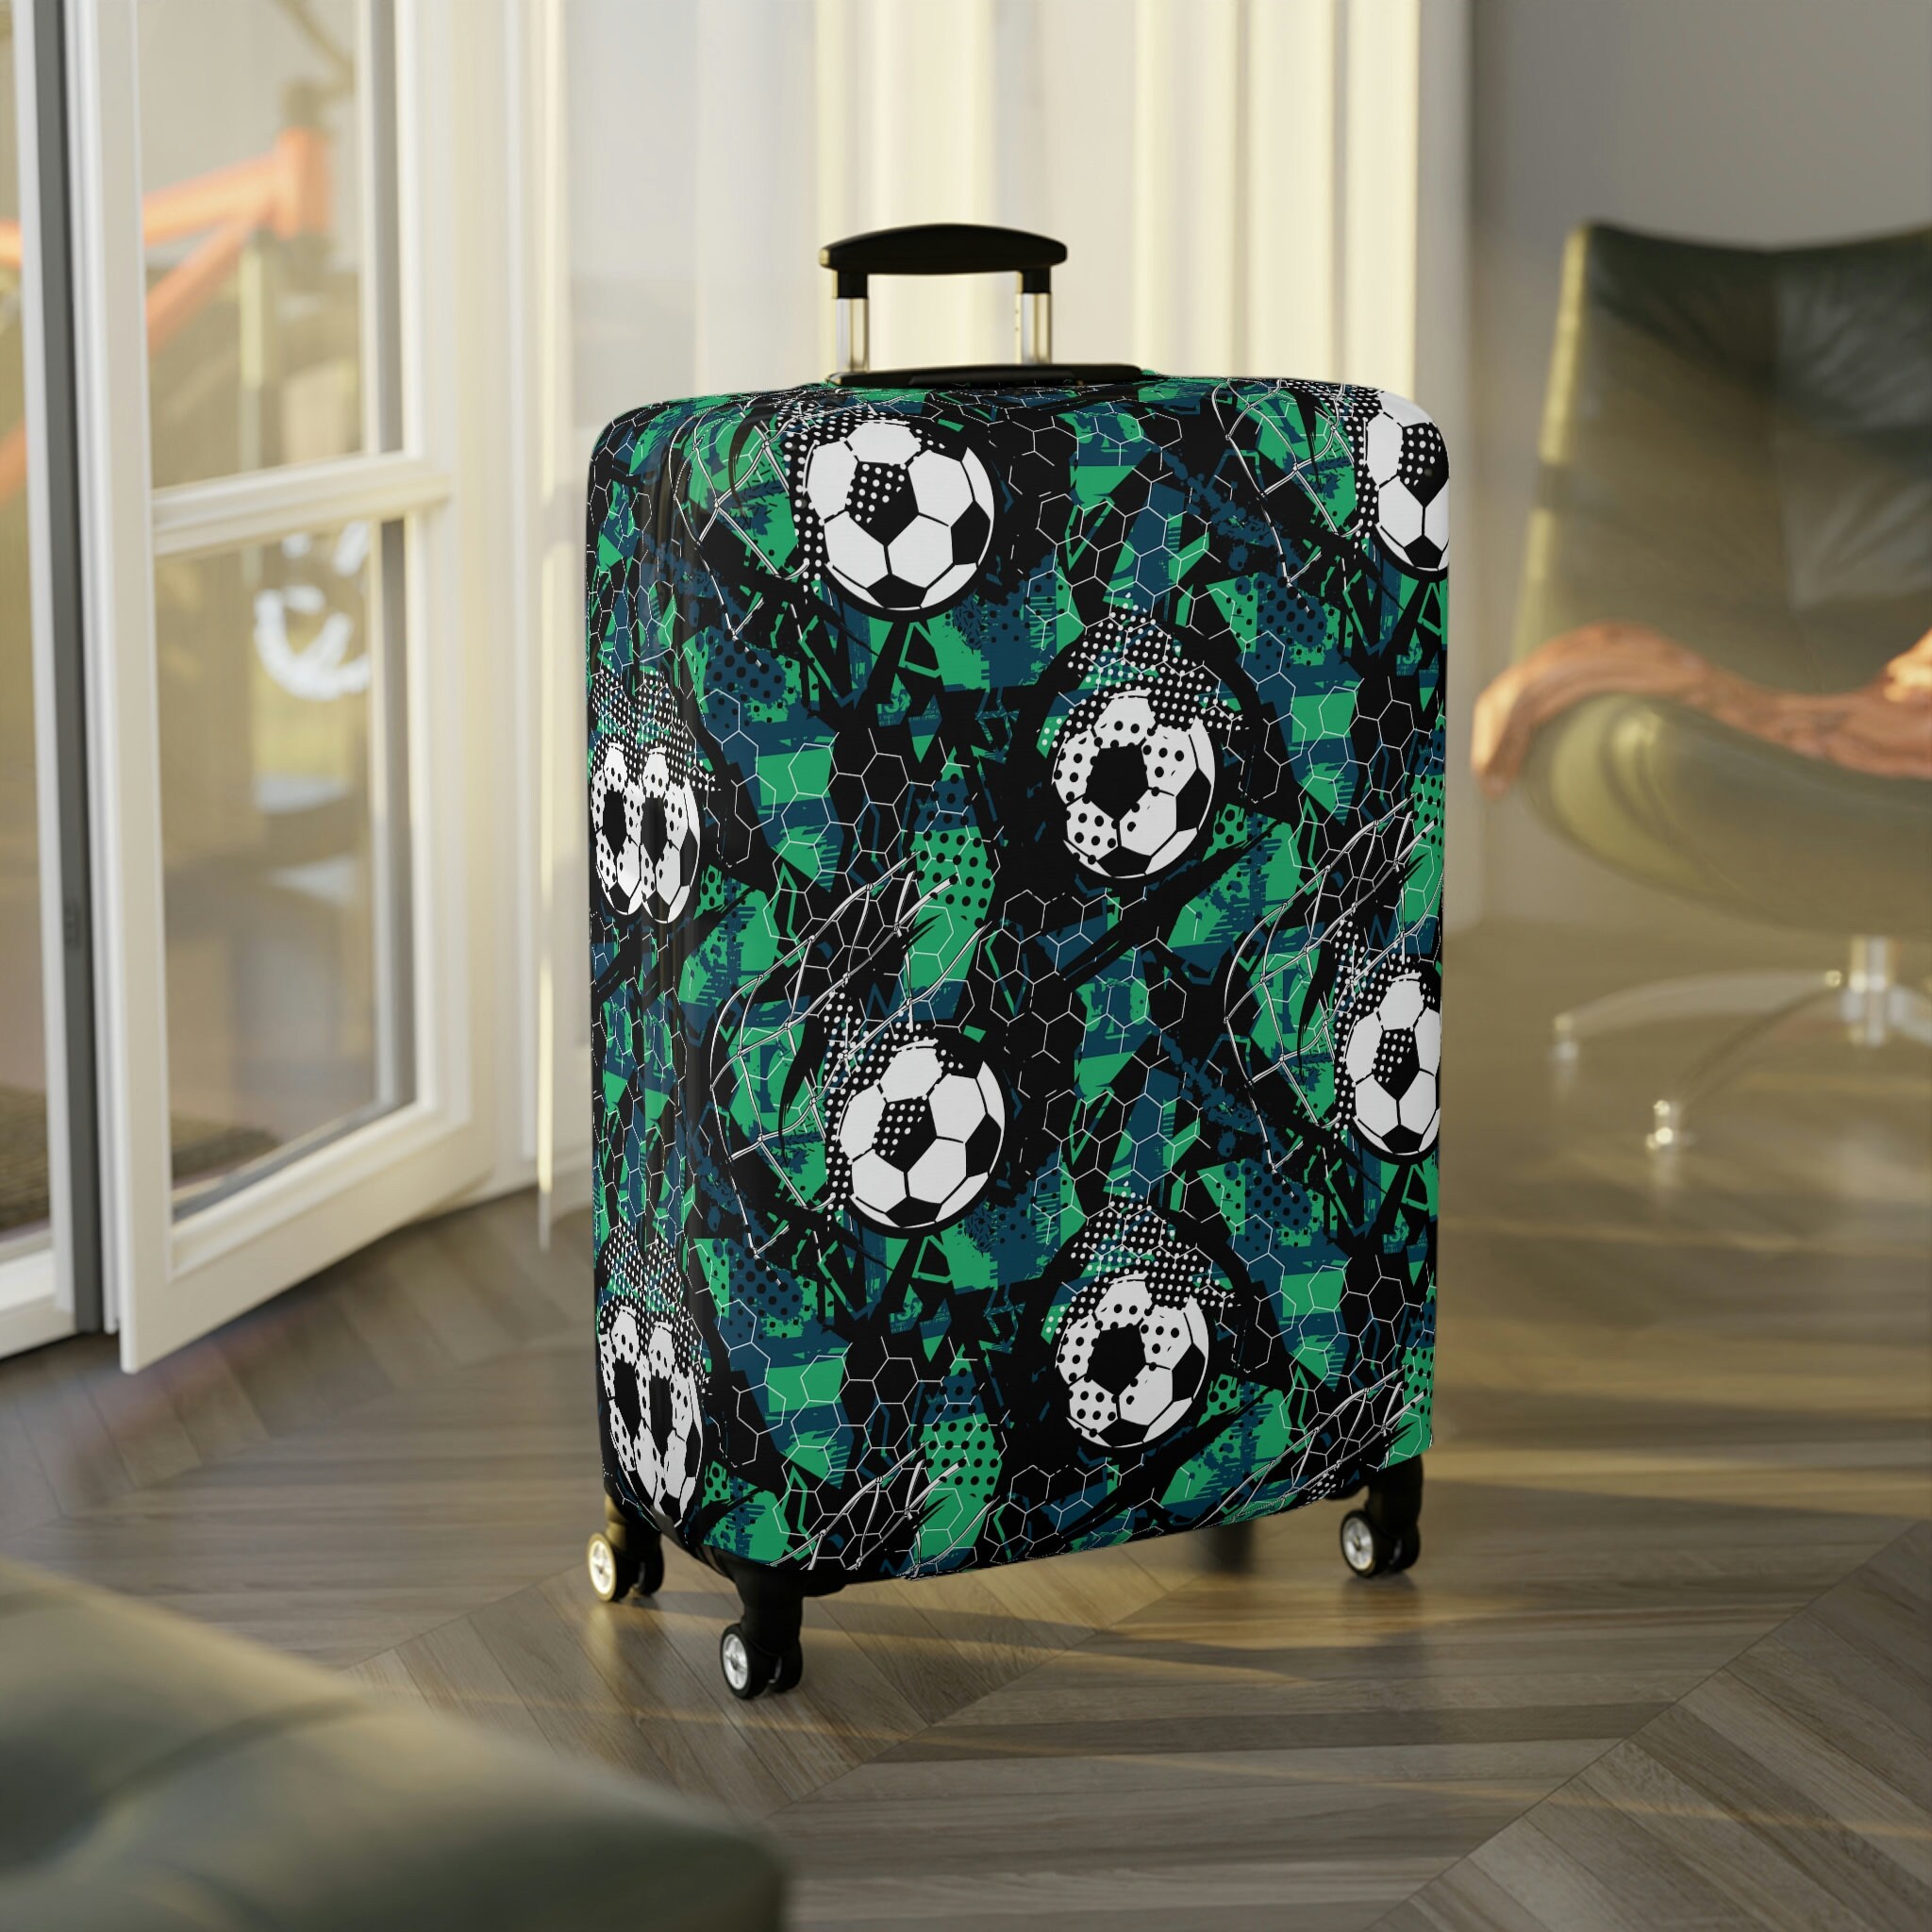 Football Luggage cover, Sport Luggage Cover